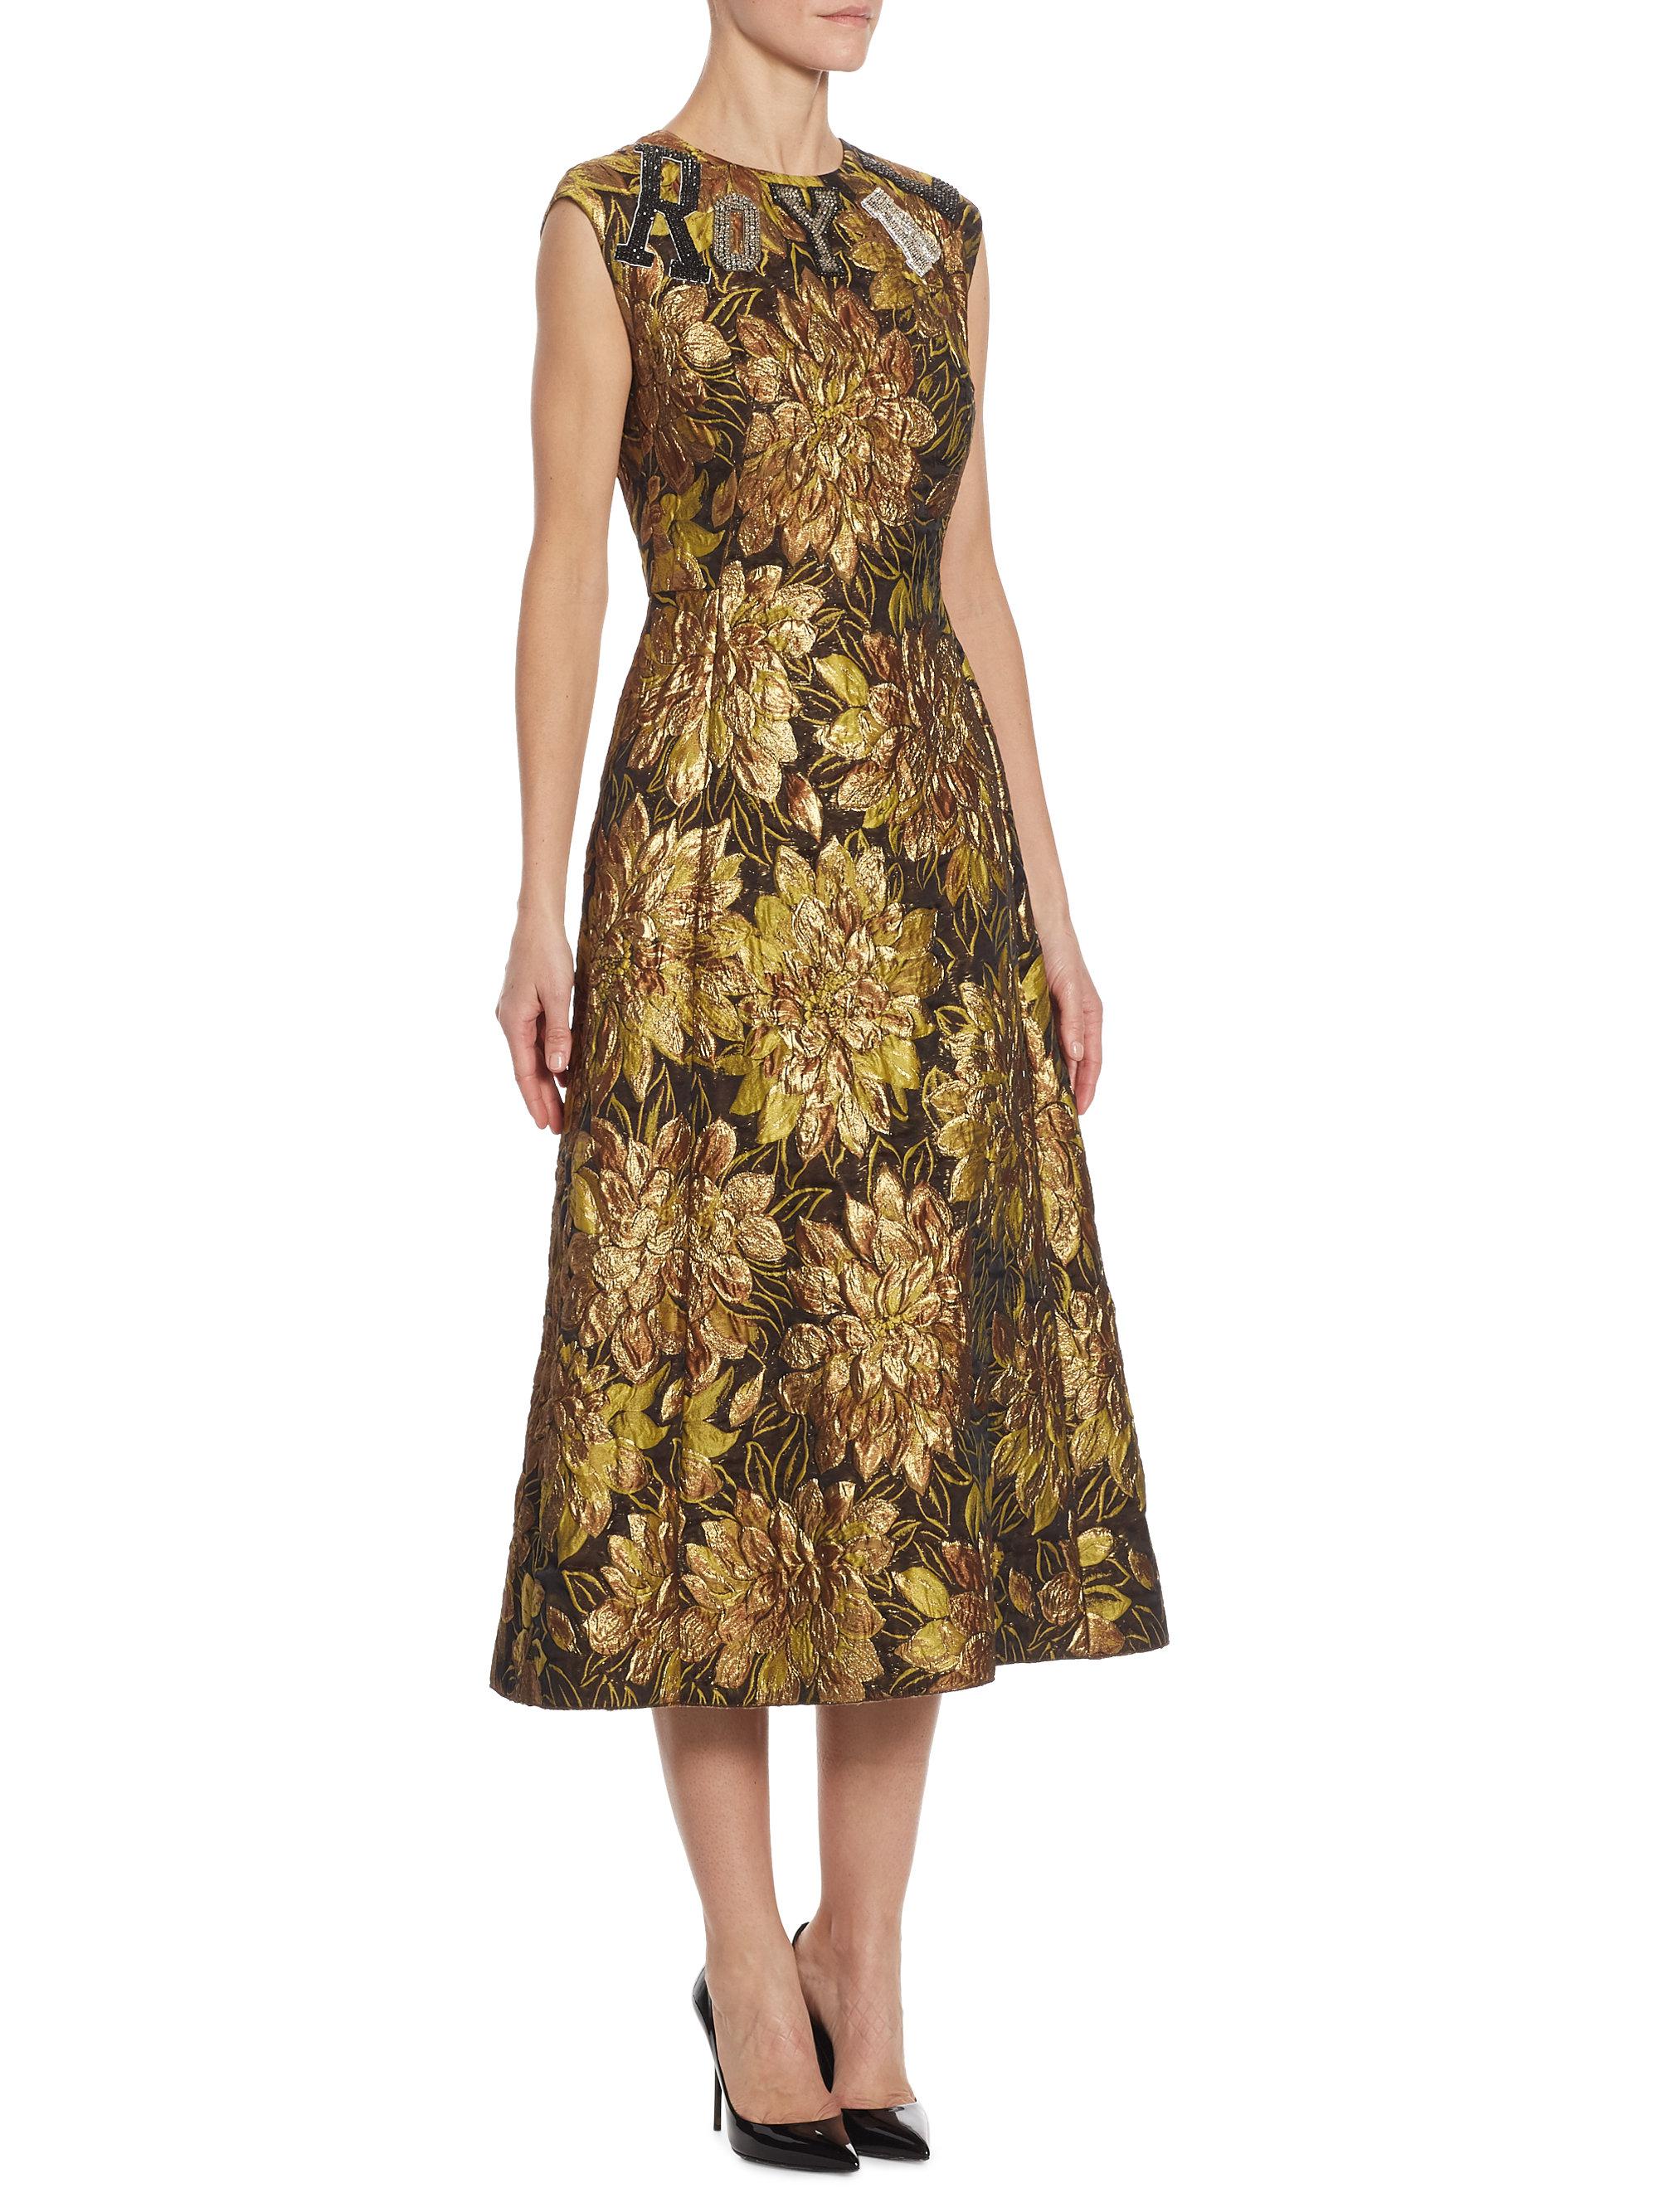 Dolce & Gabbana Synthetic Floral Jacquard Dress in Gold (Metallic) - Lyst